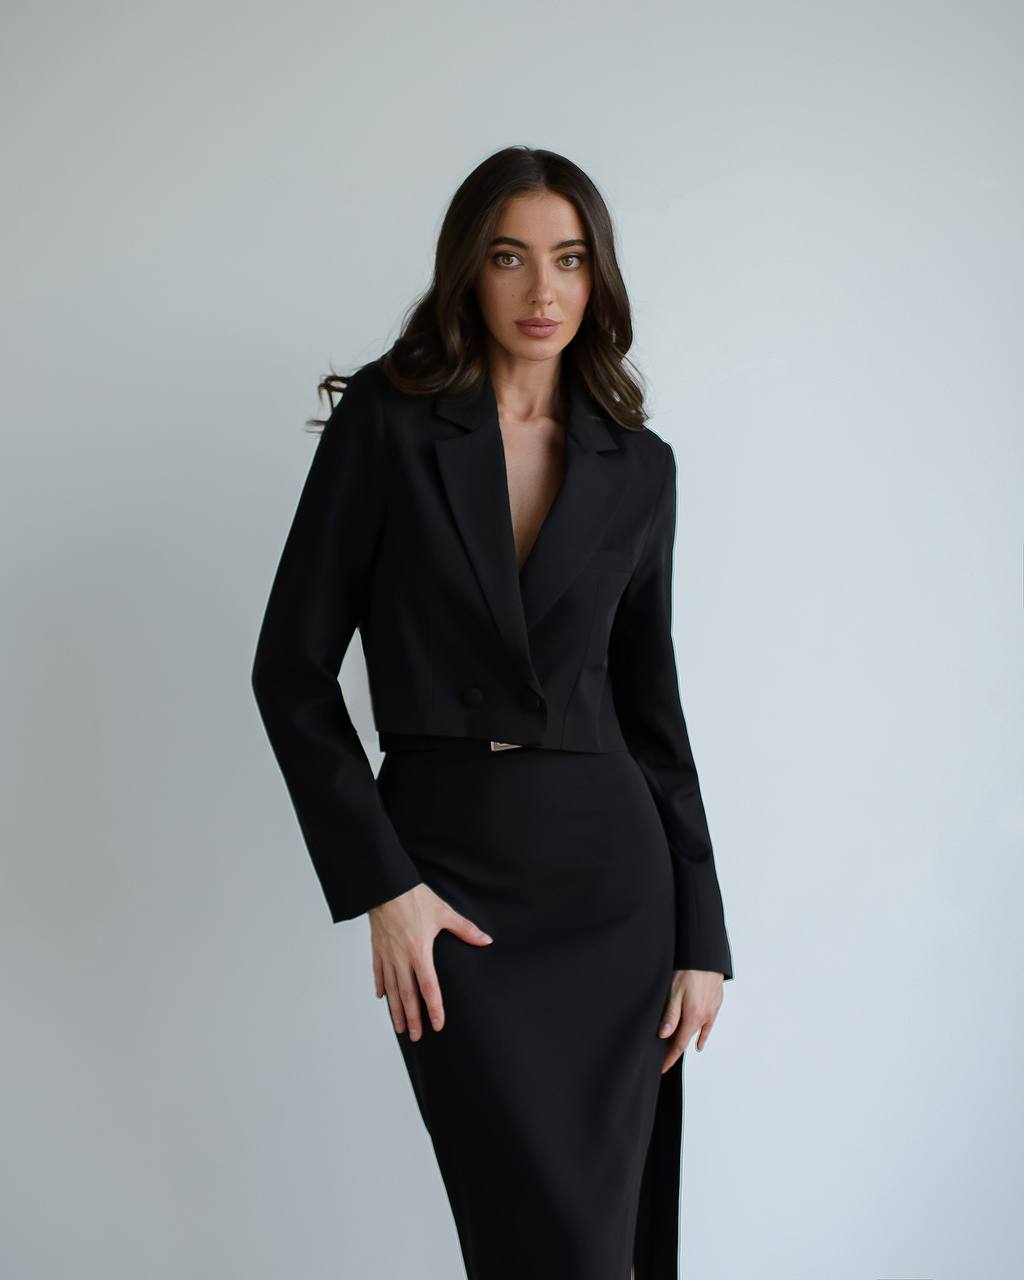 a woman wearing a black suit and heels